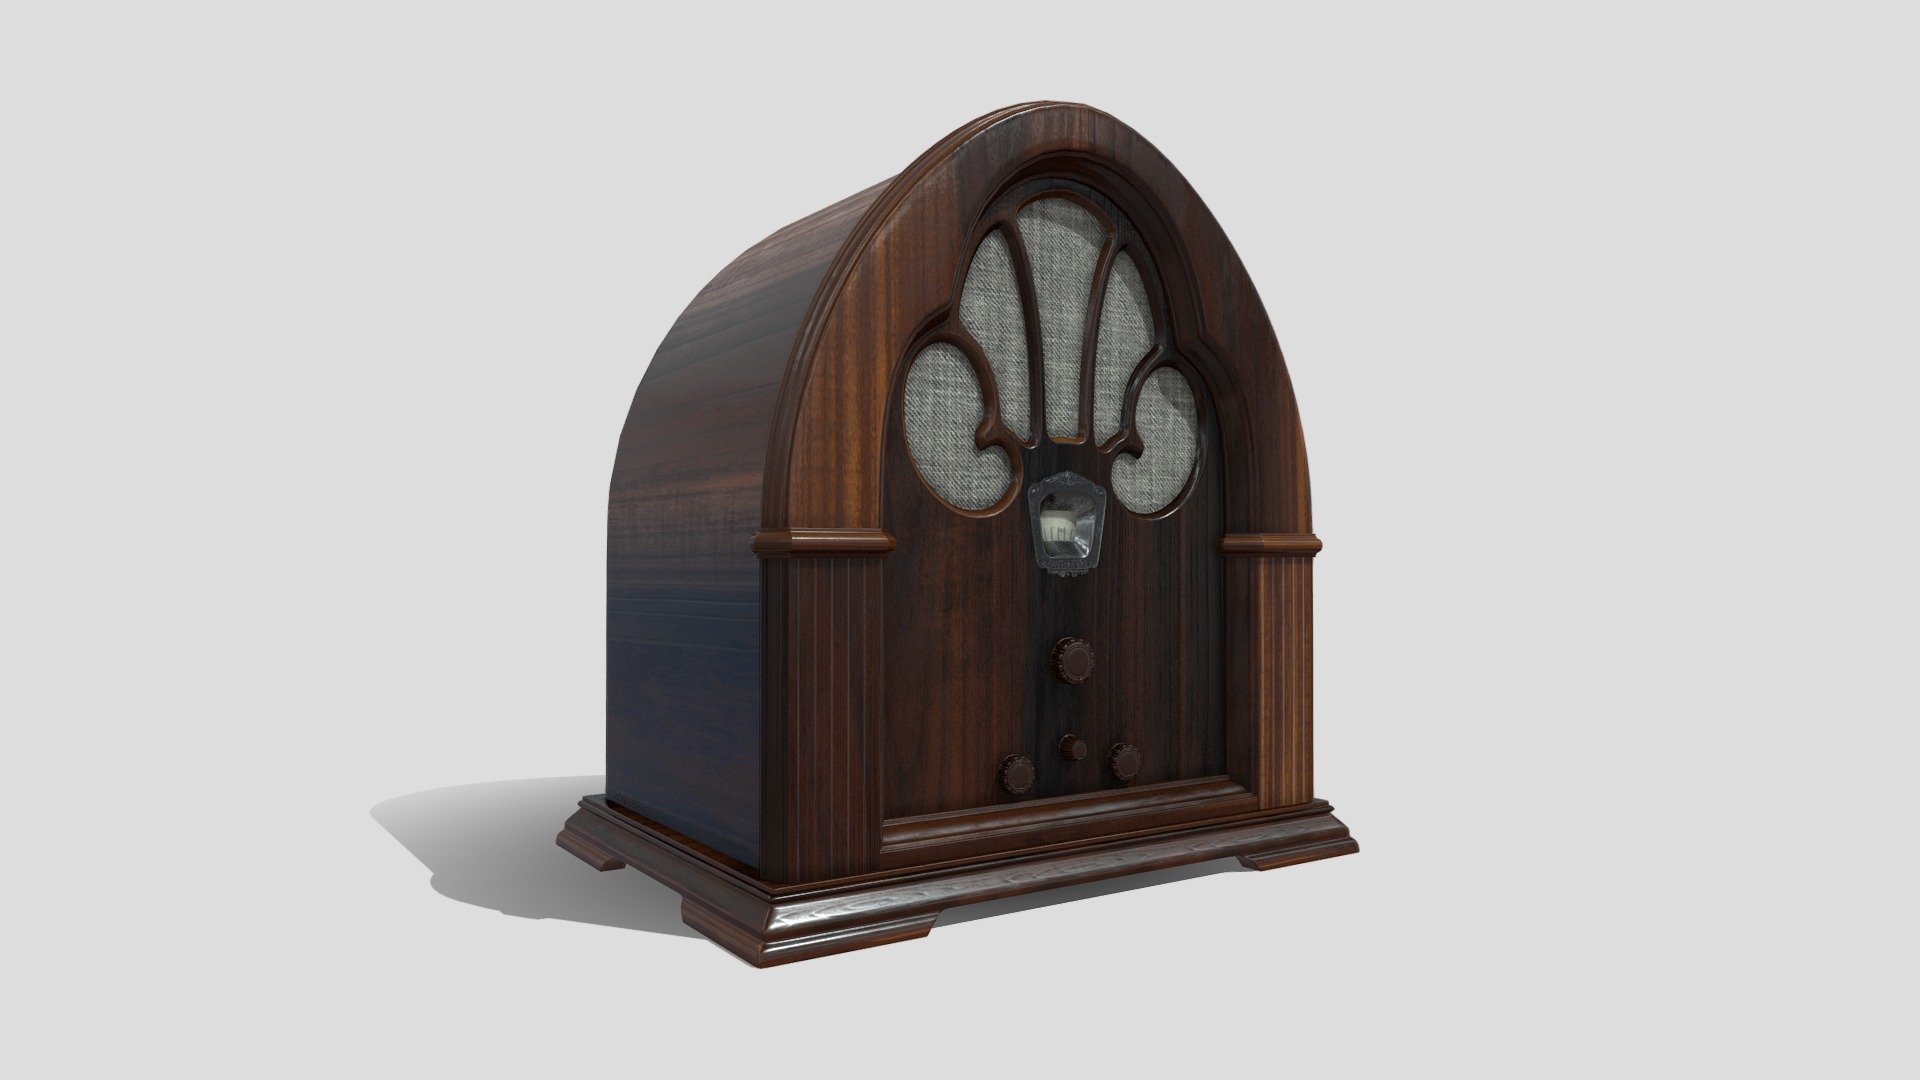 Model of an old radio (Philco 90) from 1931 with the cathedral style 3d model